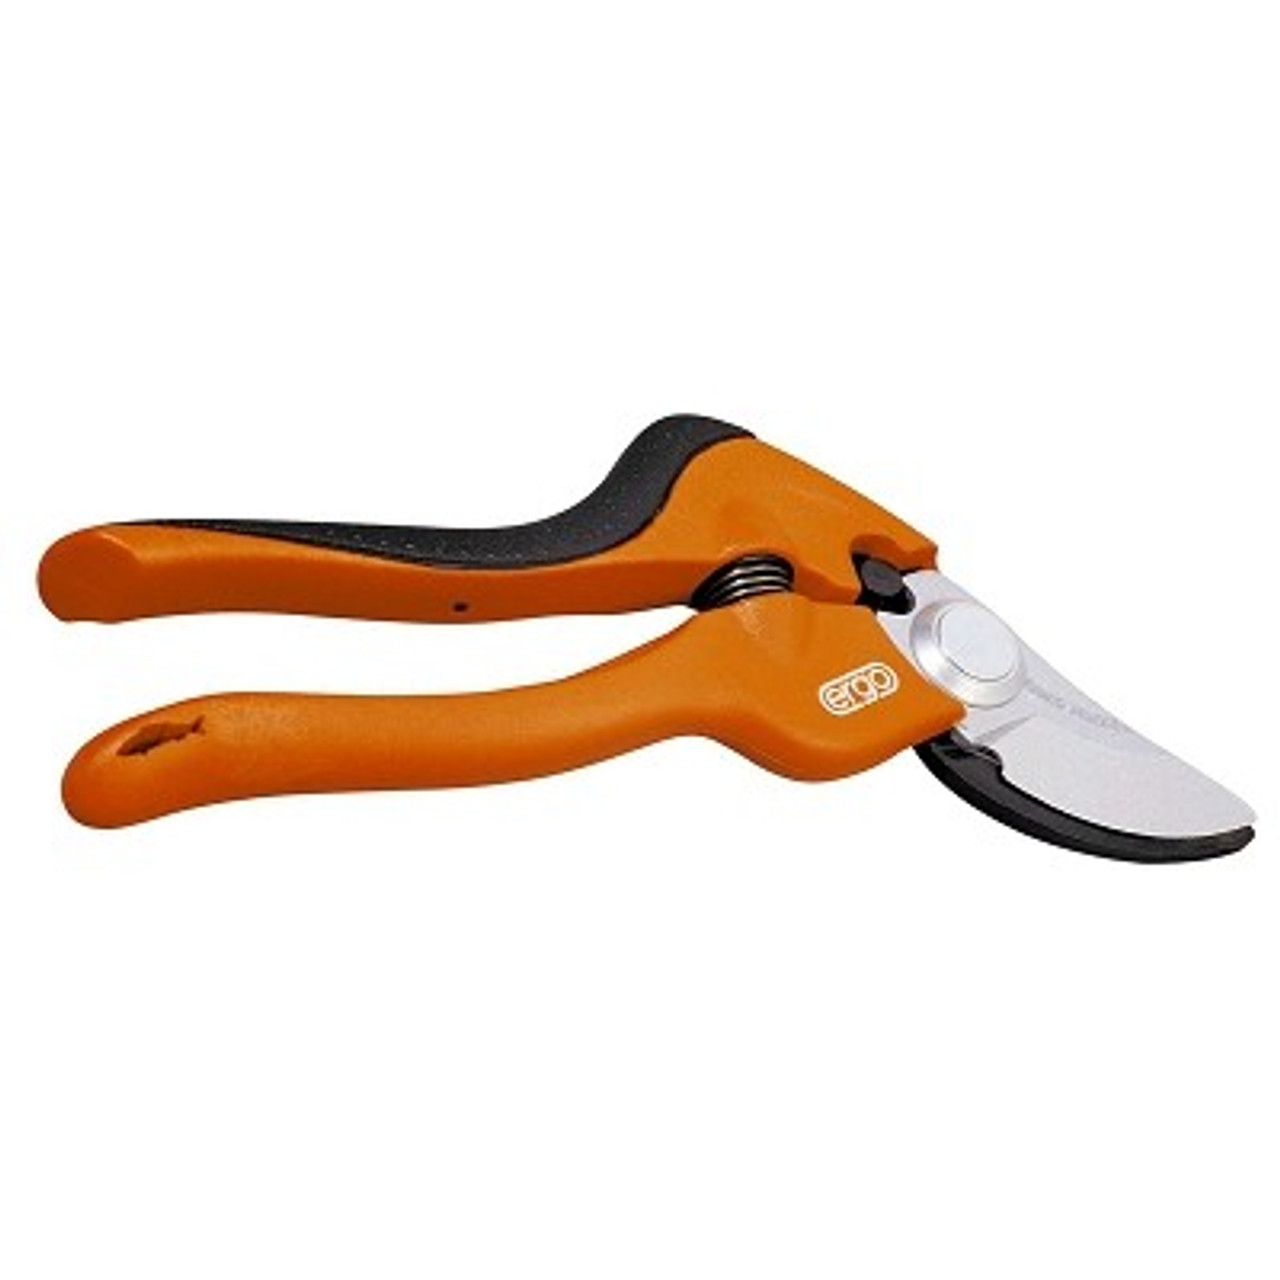 Bahco Tools Expert Medium Right-Handed Secateurs - Pruners PG-M2-F